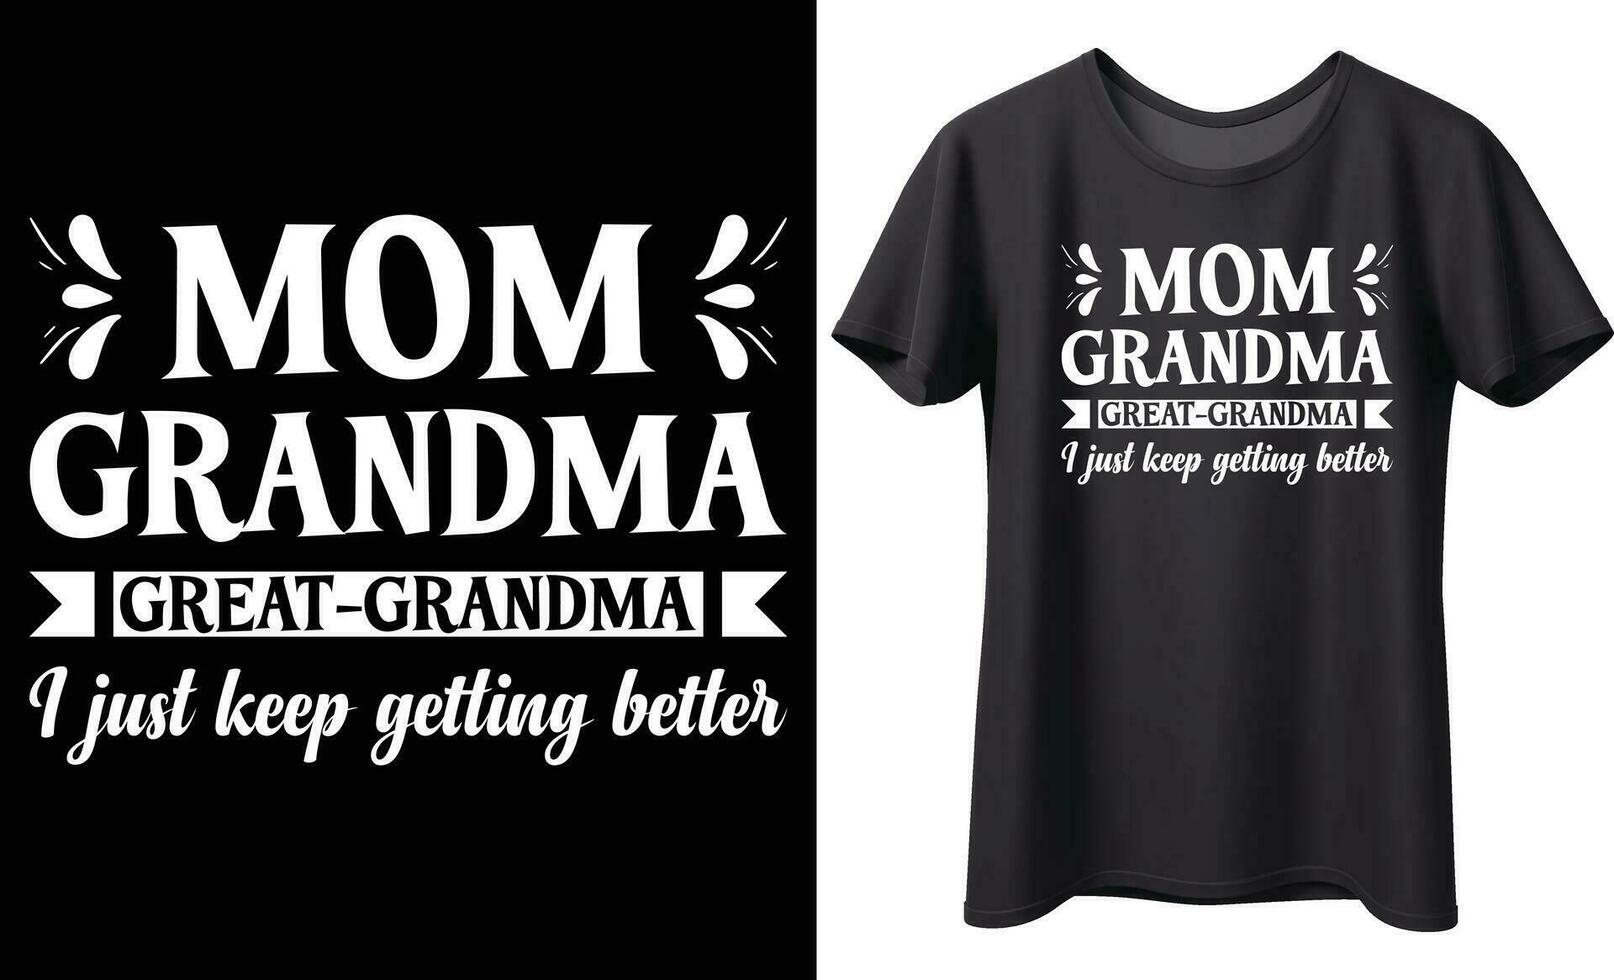 Mom grandma great grandma typography vector t-shirt Design. Perfect for print items and bag, poster, sticker, mug, template. Handwritten vector illustration. Isolated on black background.